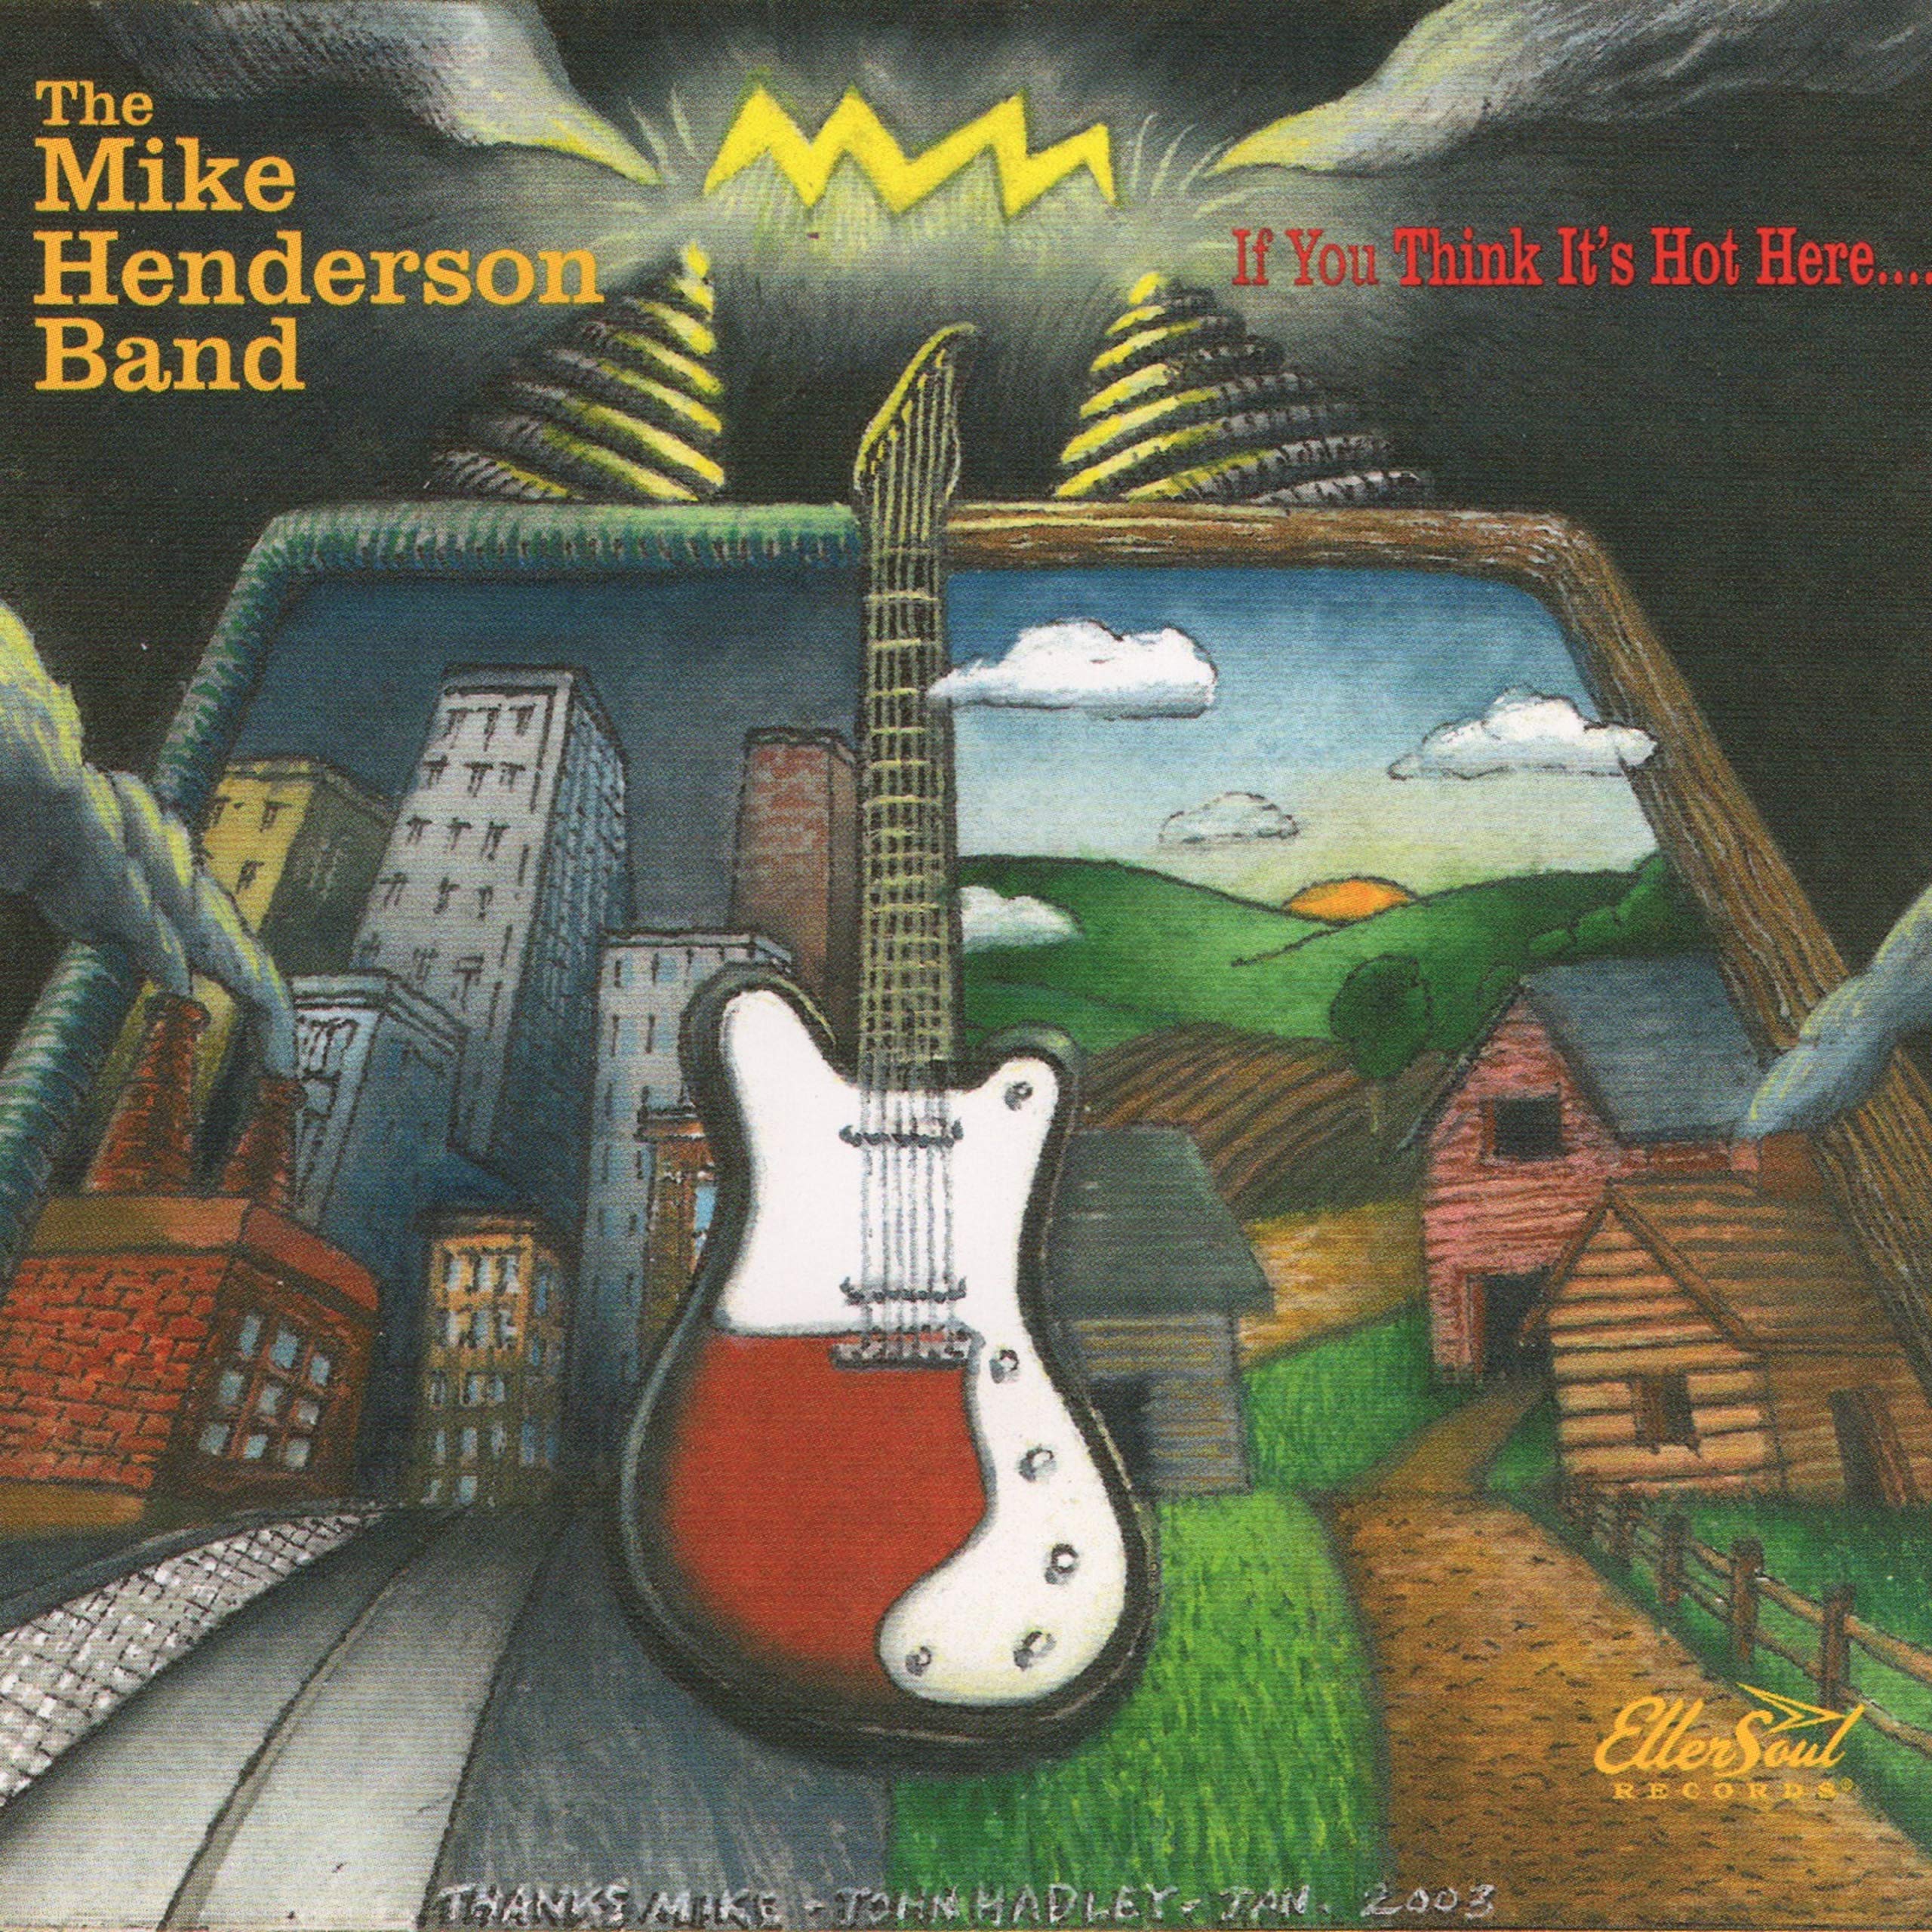 The Mike Henderson Band-If You Think Its Hot Here-(ER1501-019)-CD-FLAC-2014-6DM